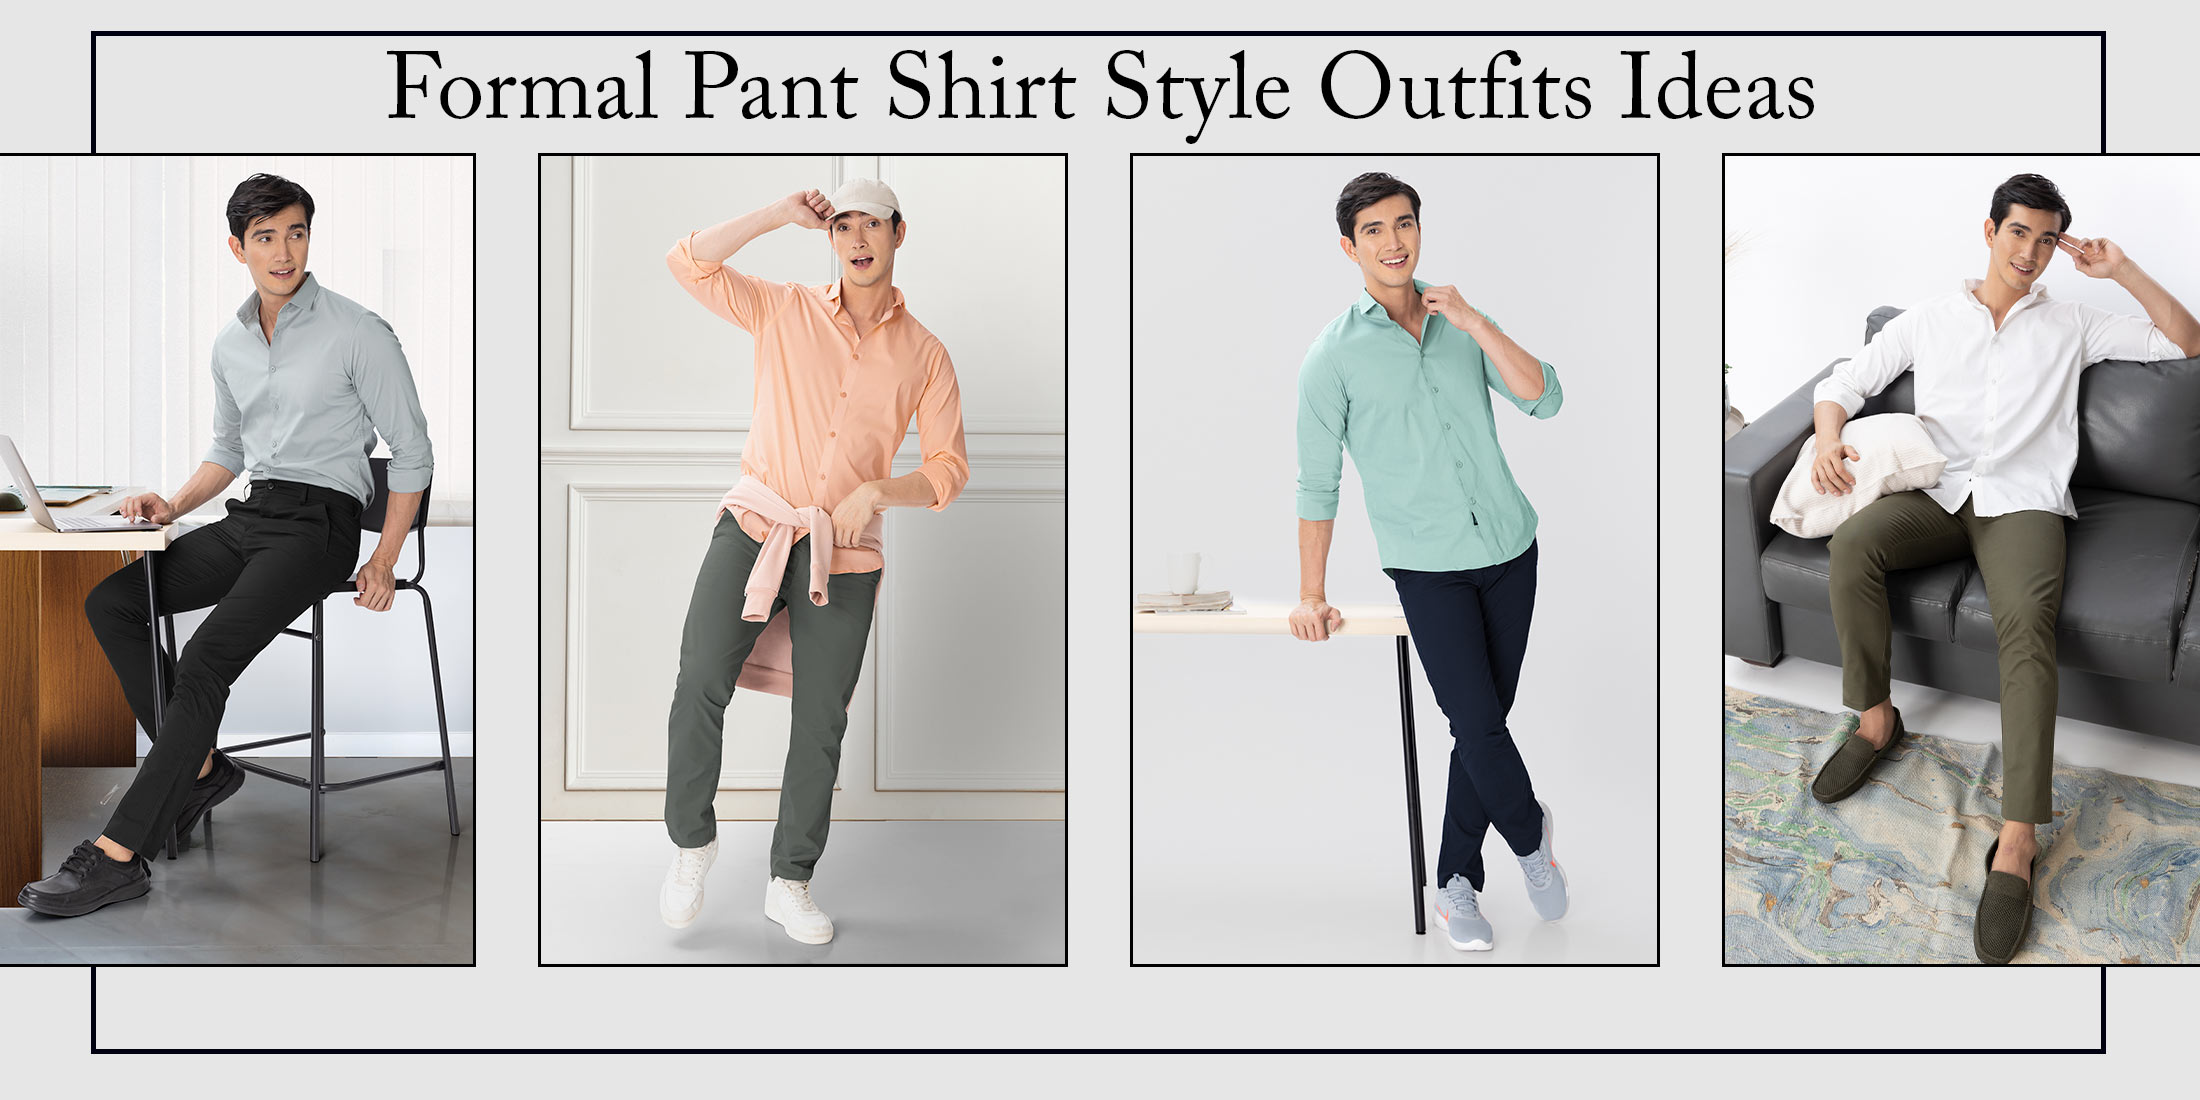 How to Wear Navy Blue Pants 16 Navy Blue Pants Outfit Ideas  Who What Wear